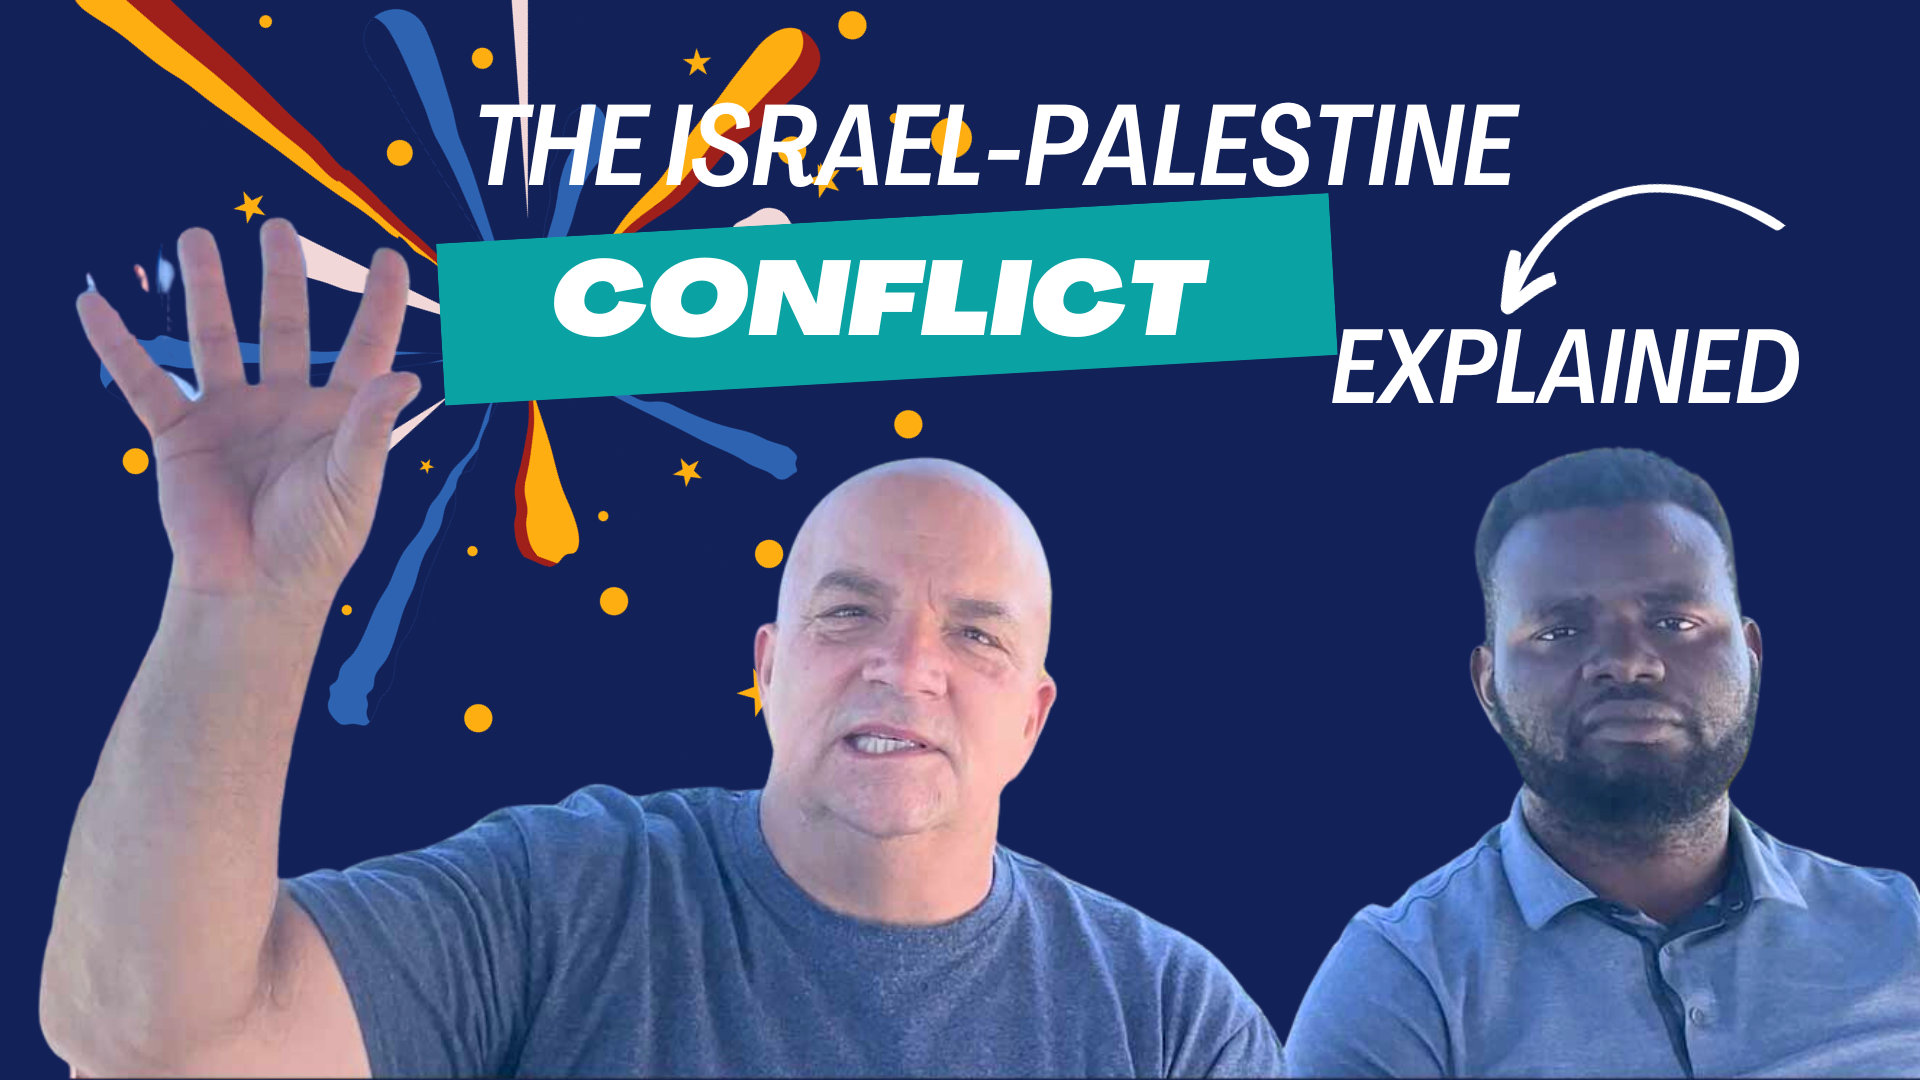 Israel Palestine Conflict Explained